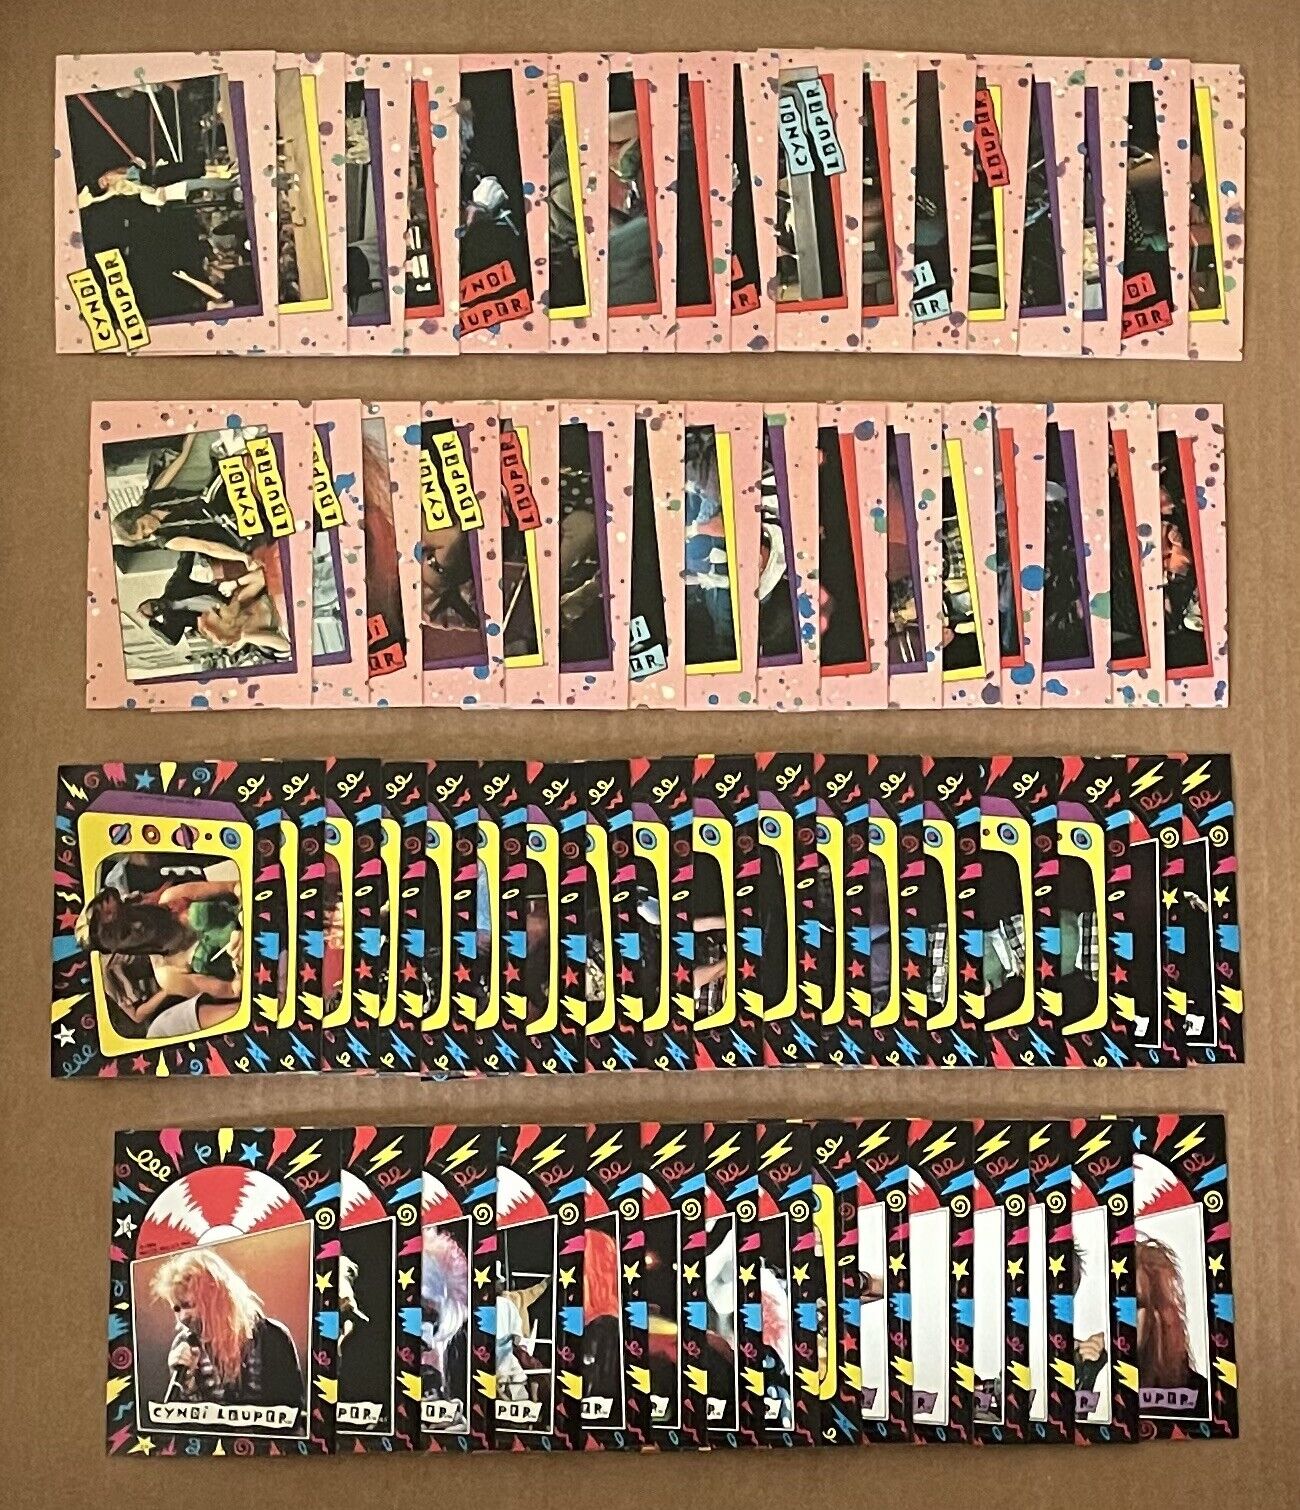 1985 Topps Cyndi Lauper complete set of 66 different cards and stickers